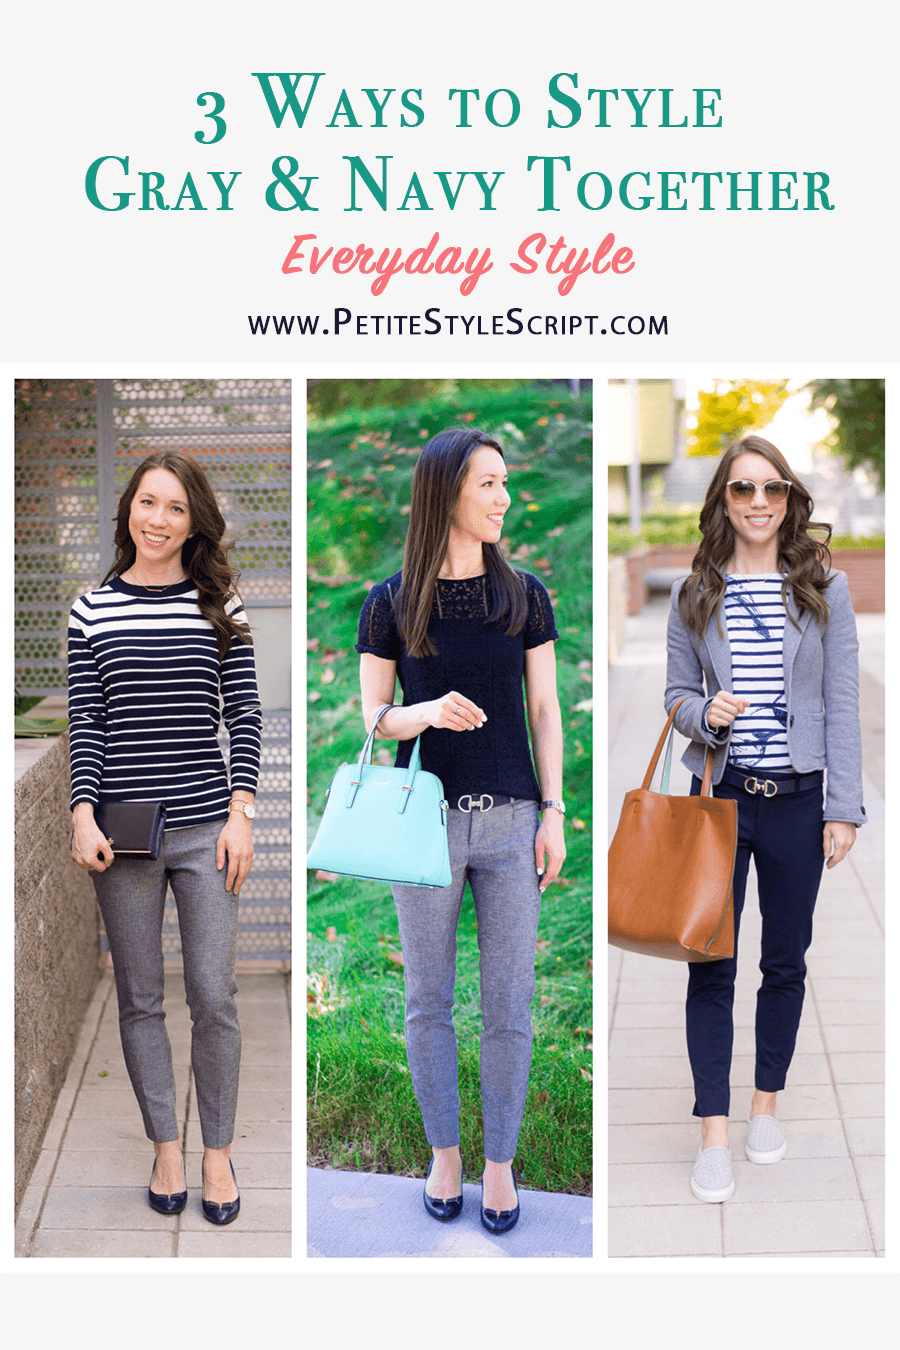 3 Ways to Style Gray & Navy Together - Petite Style Script